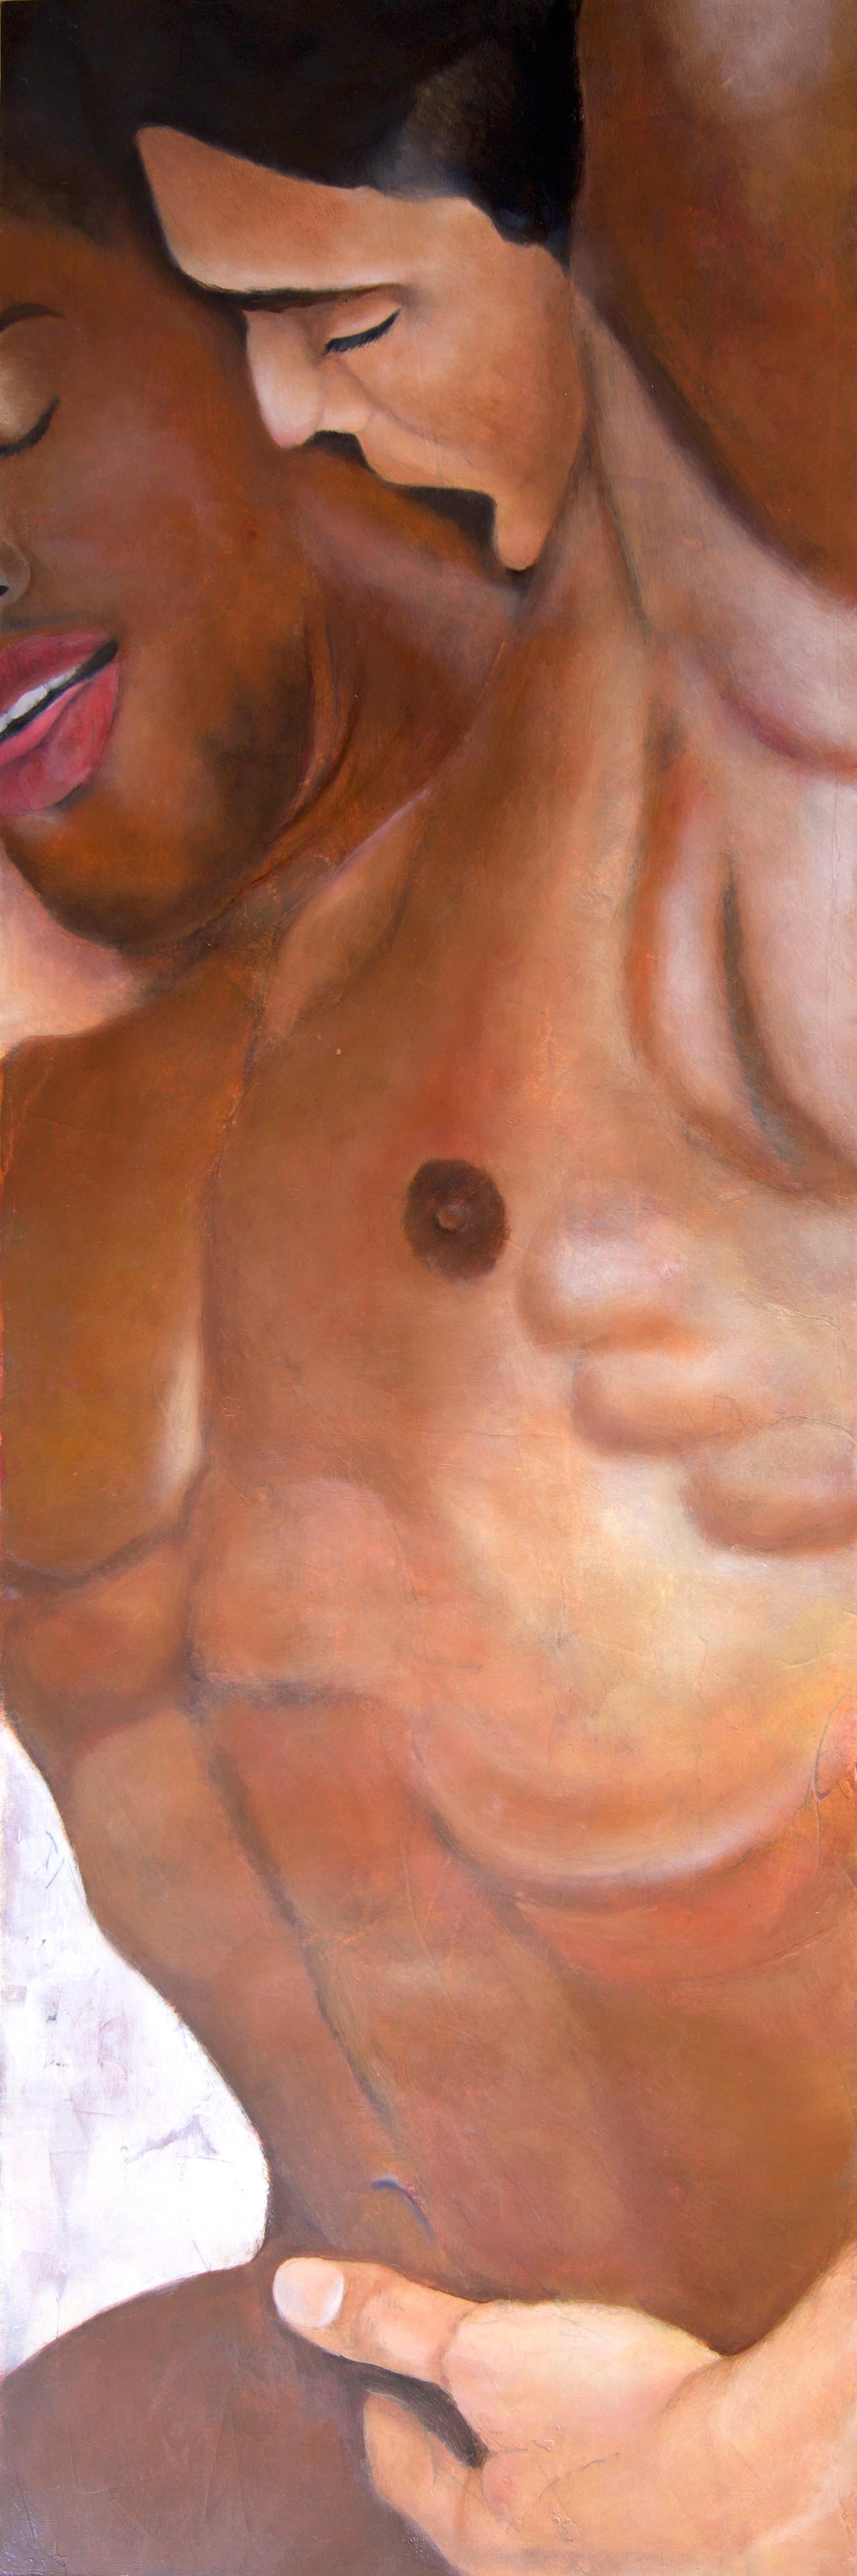 Rick Sindt Nude Painting - And Then On To You - Intimate Painting, Two Male Nudes Entangled in One Another